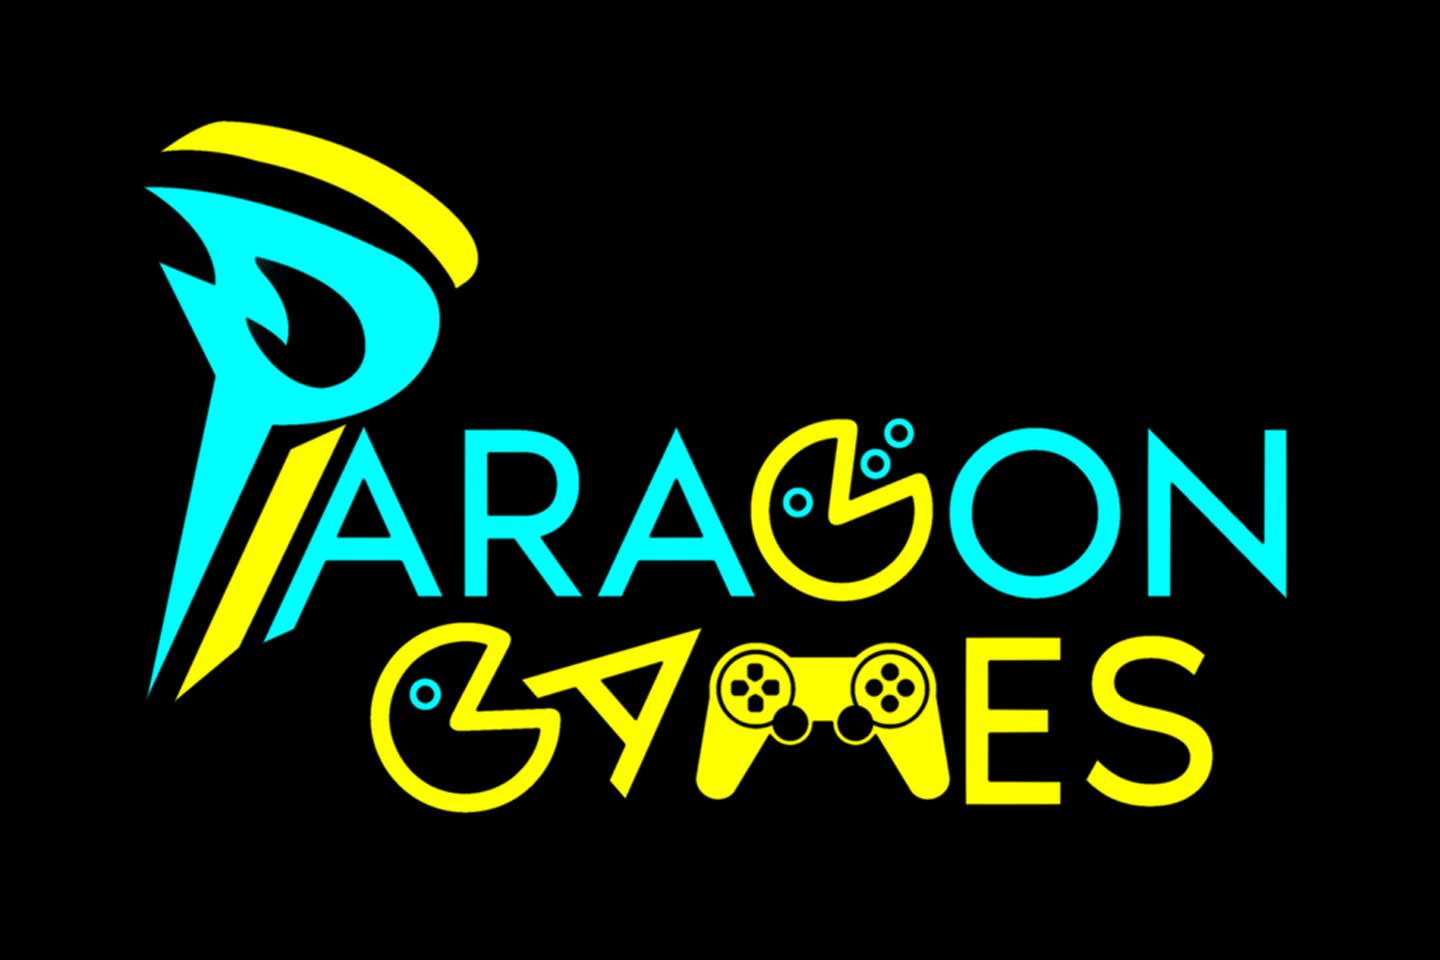 Colourful text saying Paragon Games